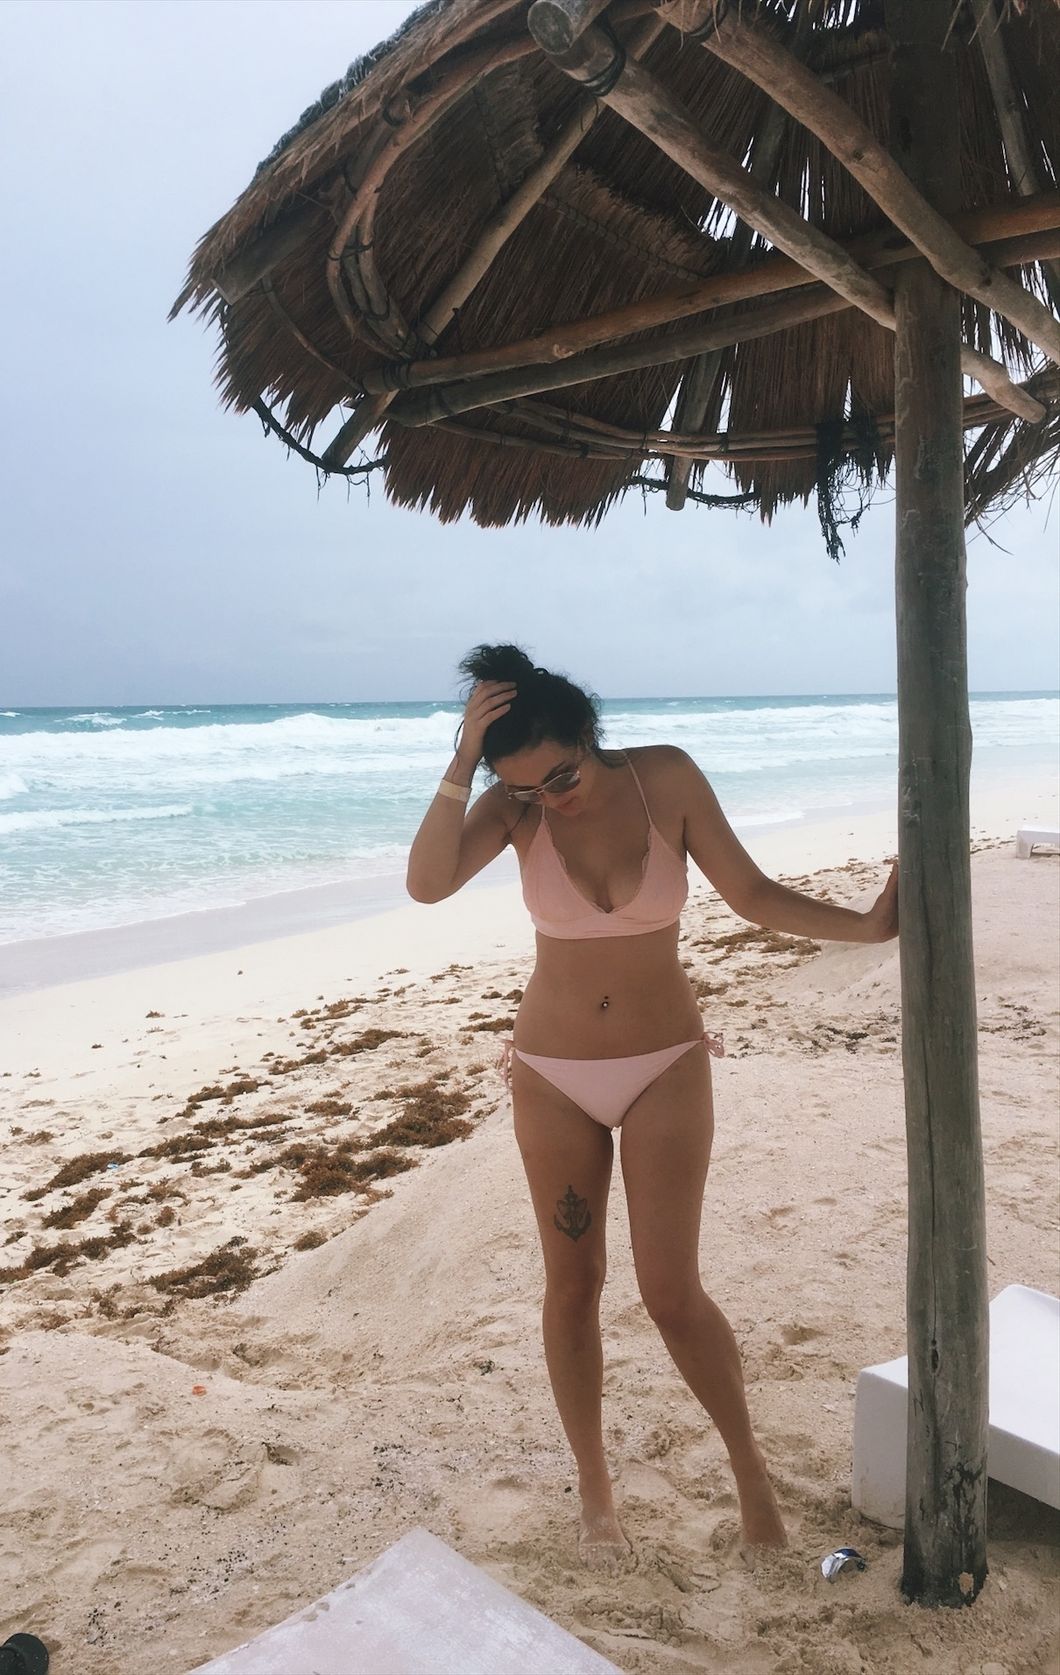 I Chased The 'Influencer Lifestyle' Until It Nearly Broke Me, Now I'm Just Living For Me